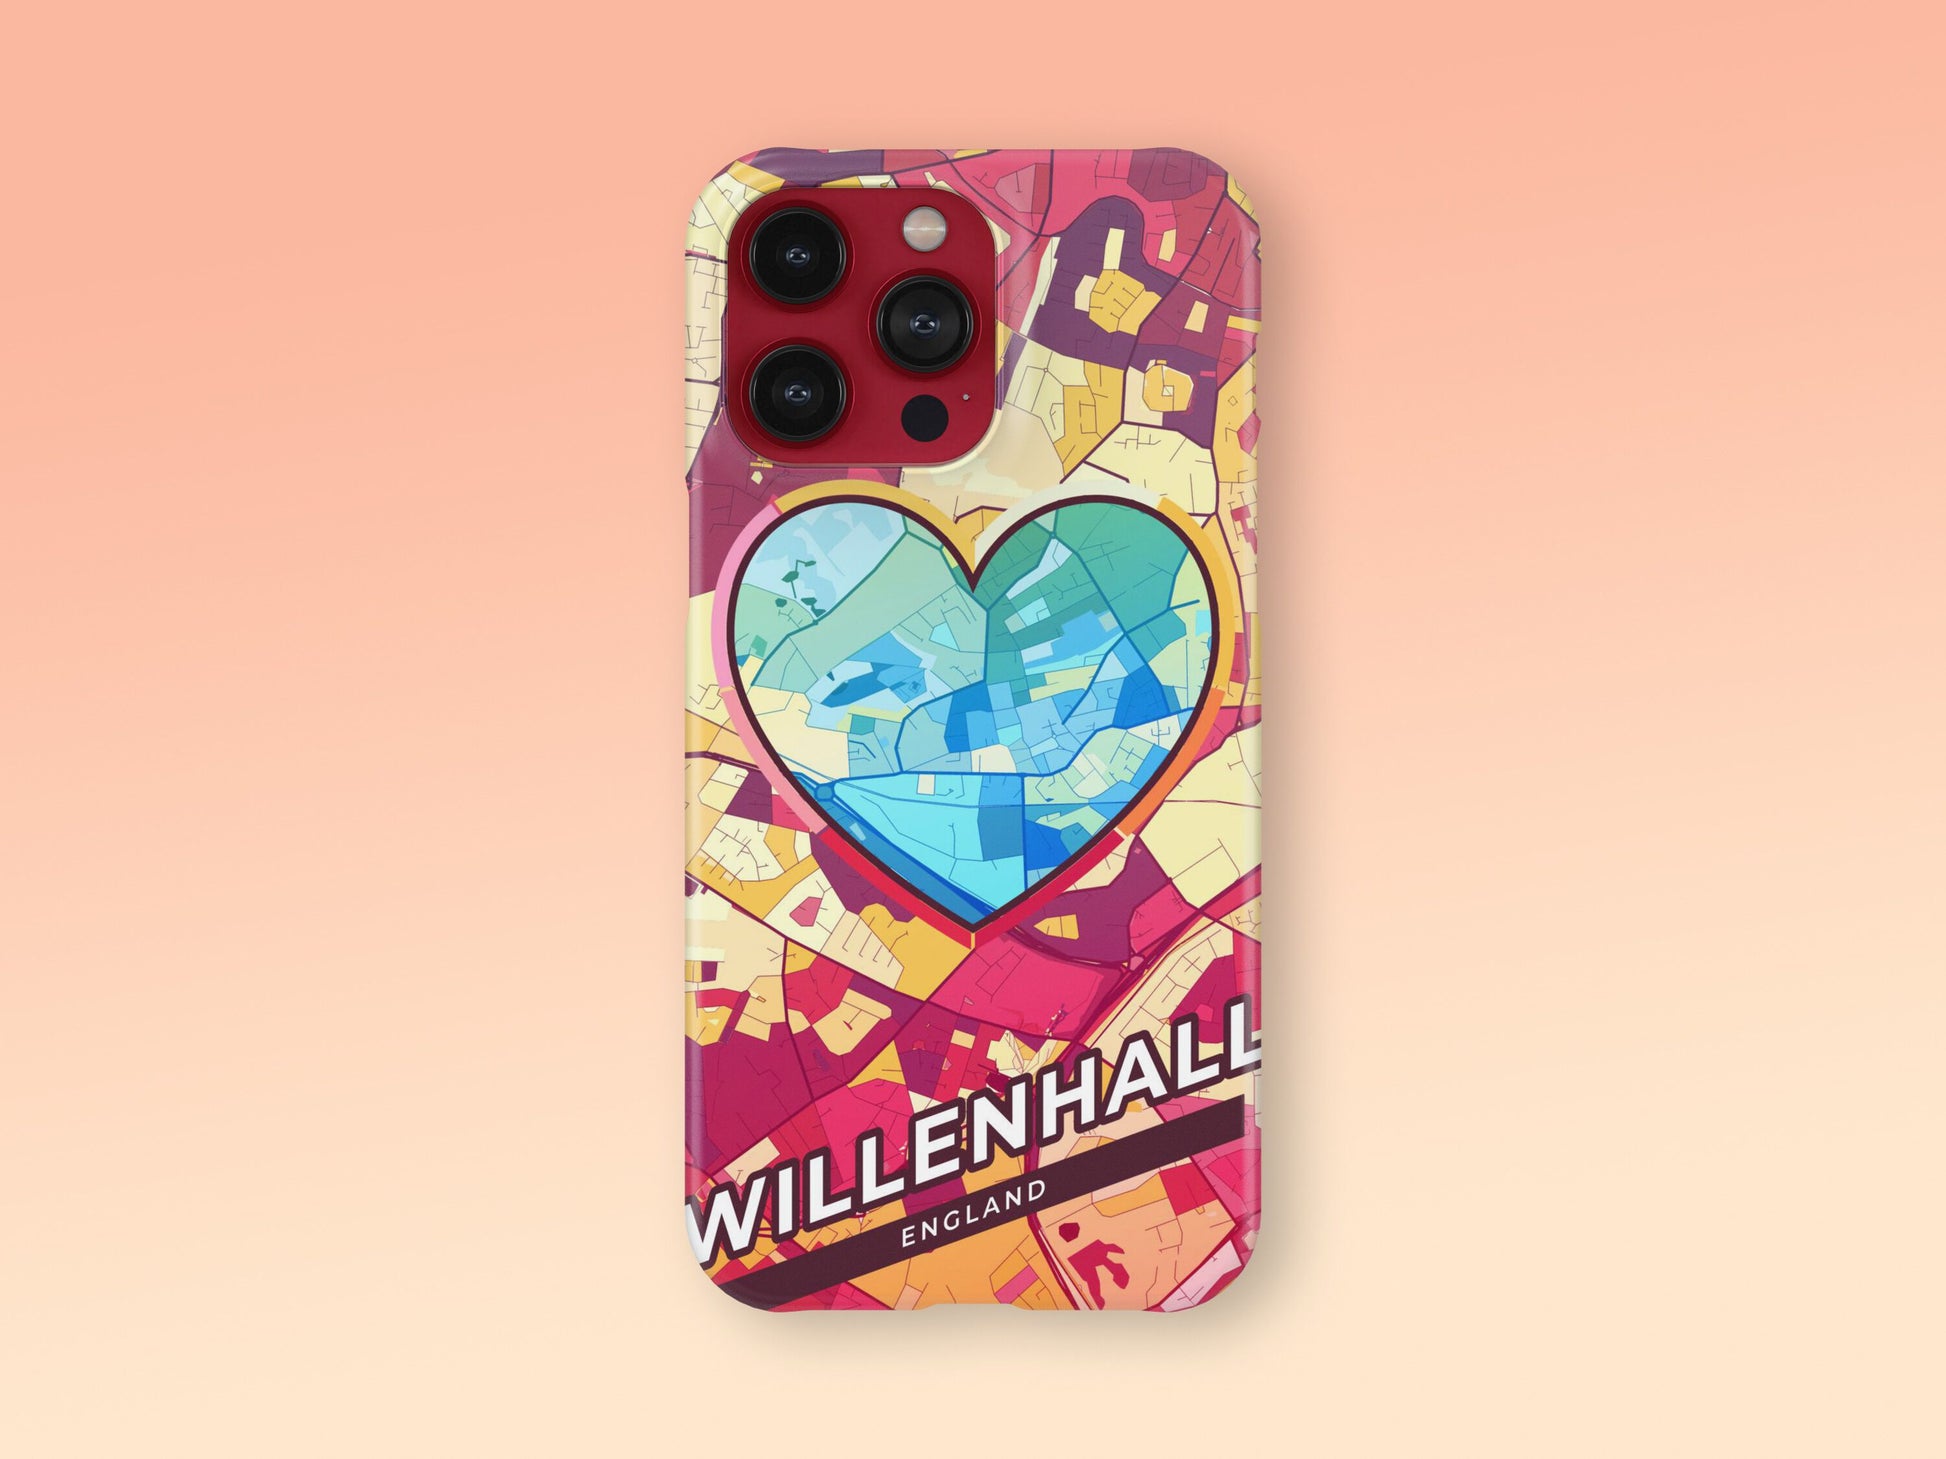 Willenhall England slim phone case with colorful icon 2